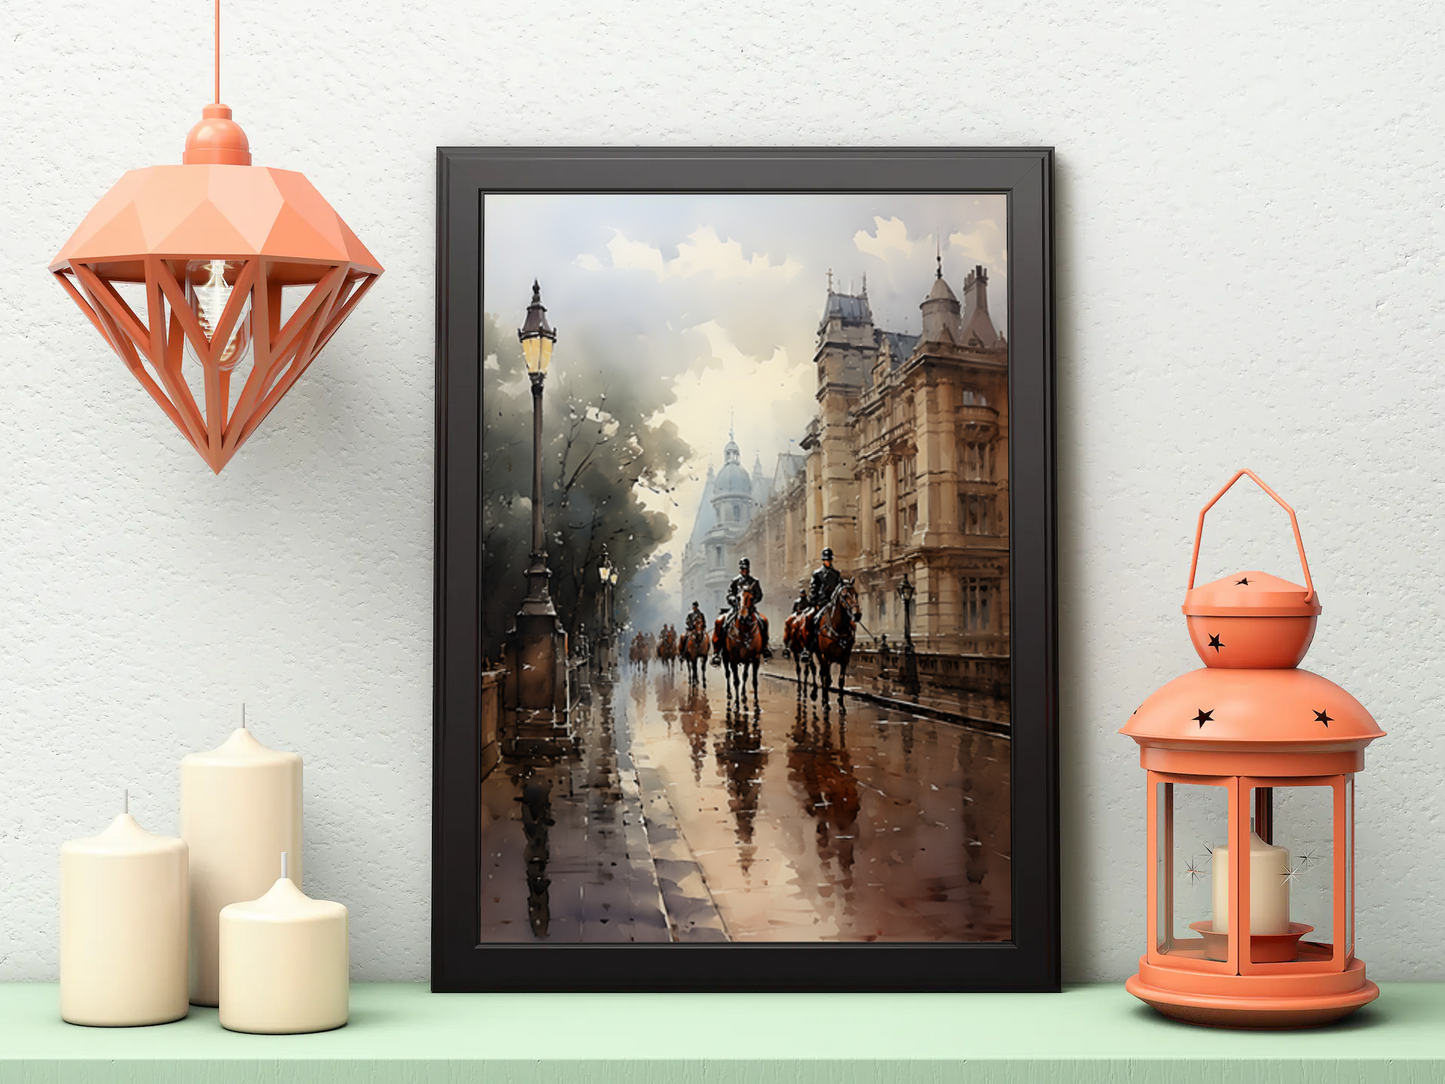 Icons of London Living Room Wall Painting ( 14X18 inches each)